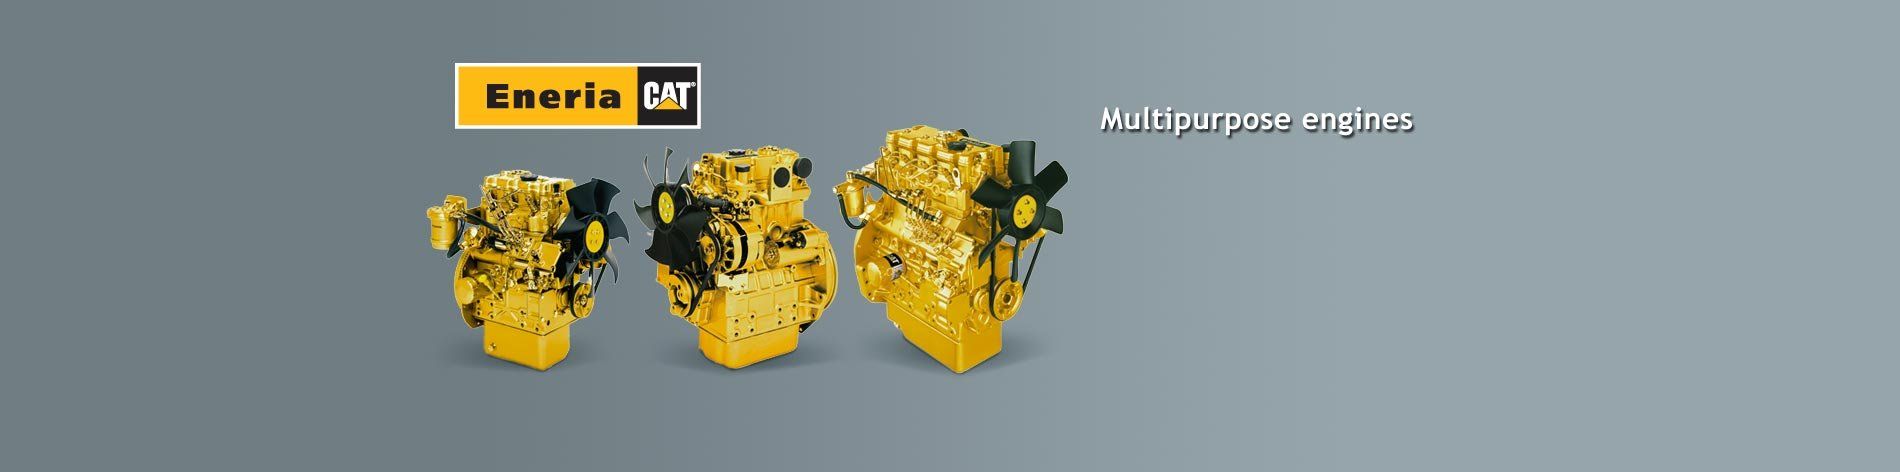 We offer you the complete line of Caterpillar diesel engines in many different versions.